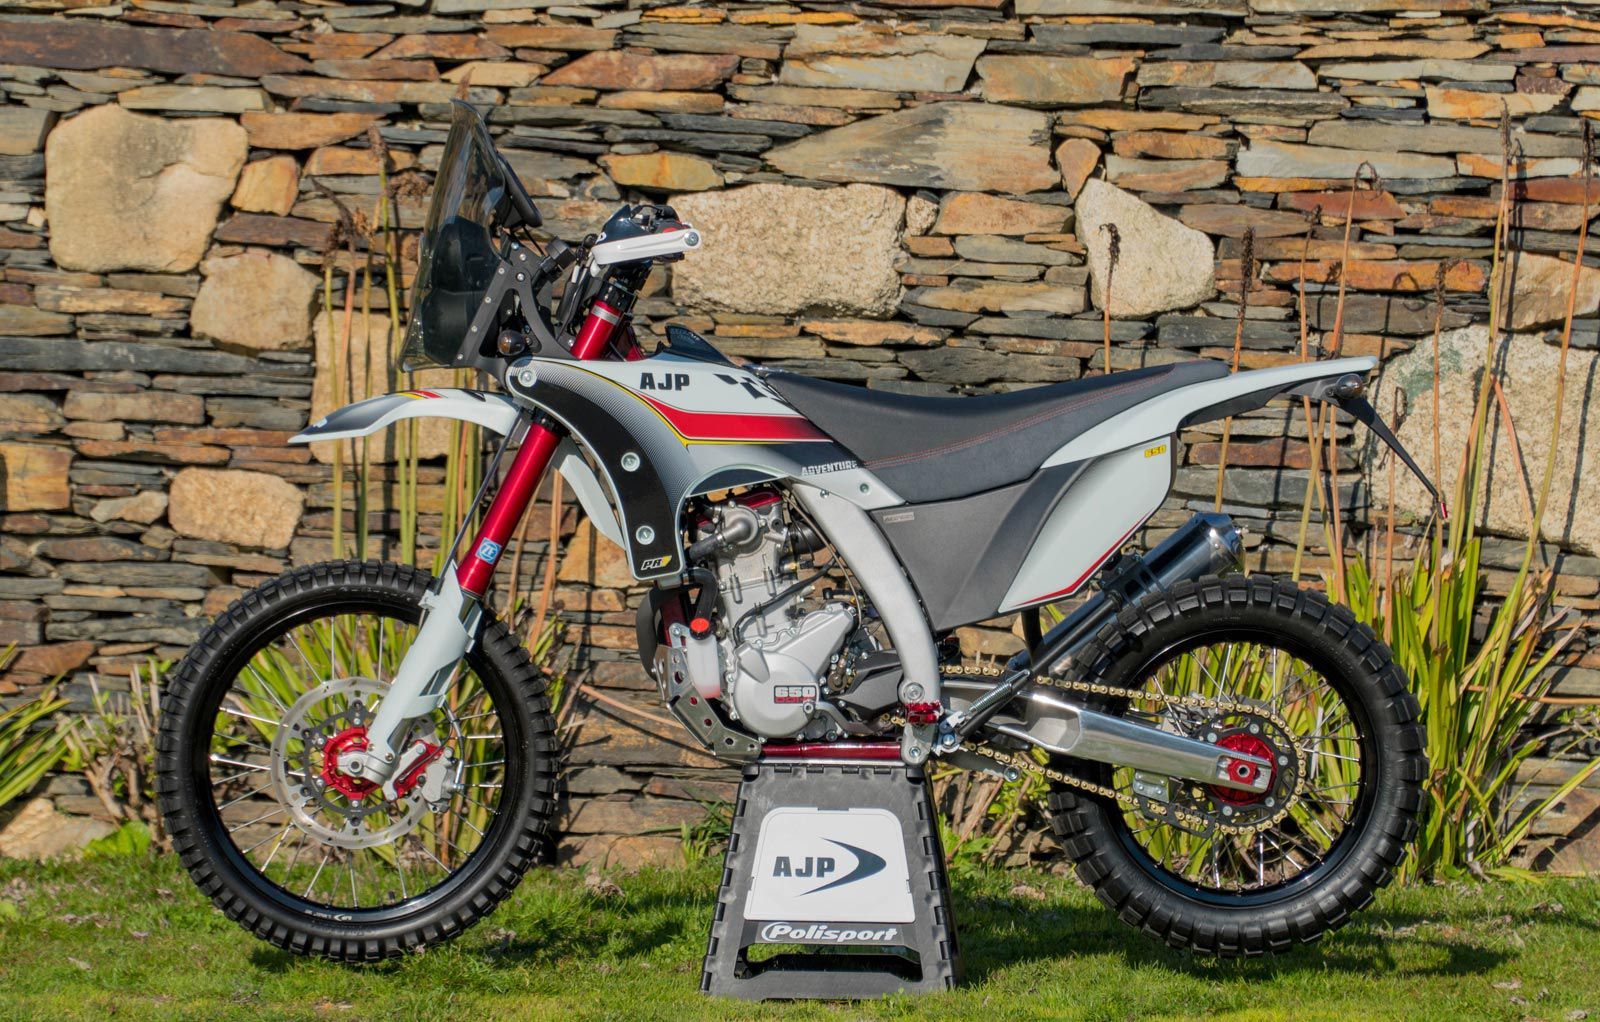 The bike's seat gives its rider plenty of room to move and slide around while wrestling the thumper through the dirt